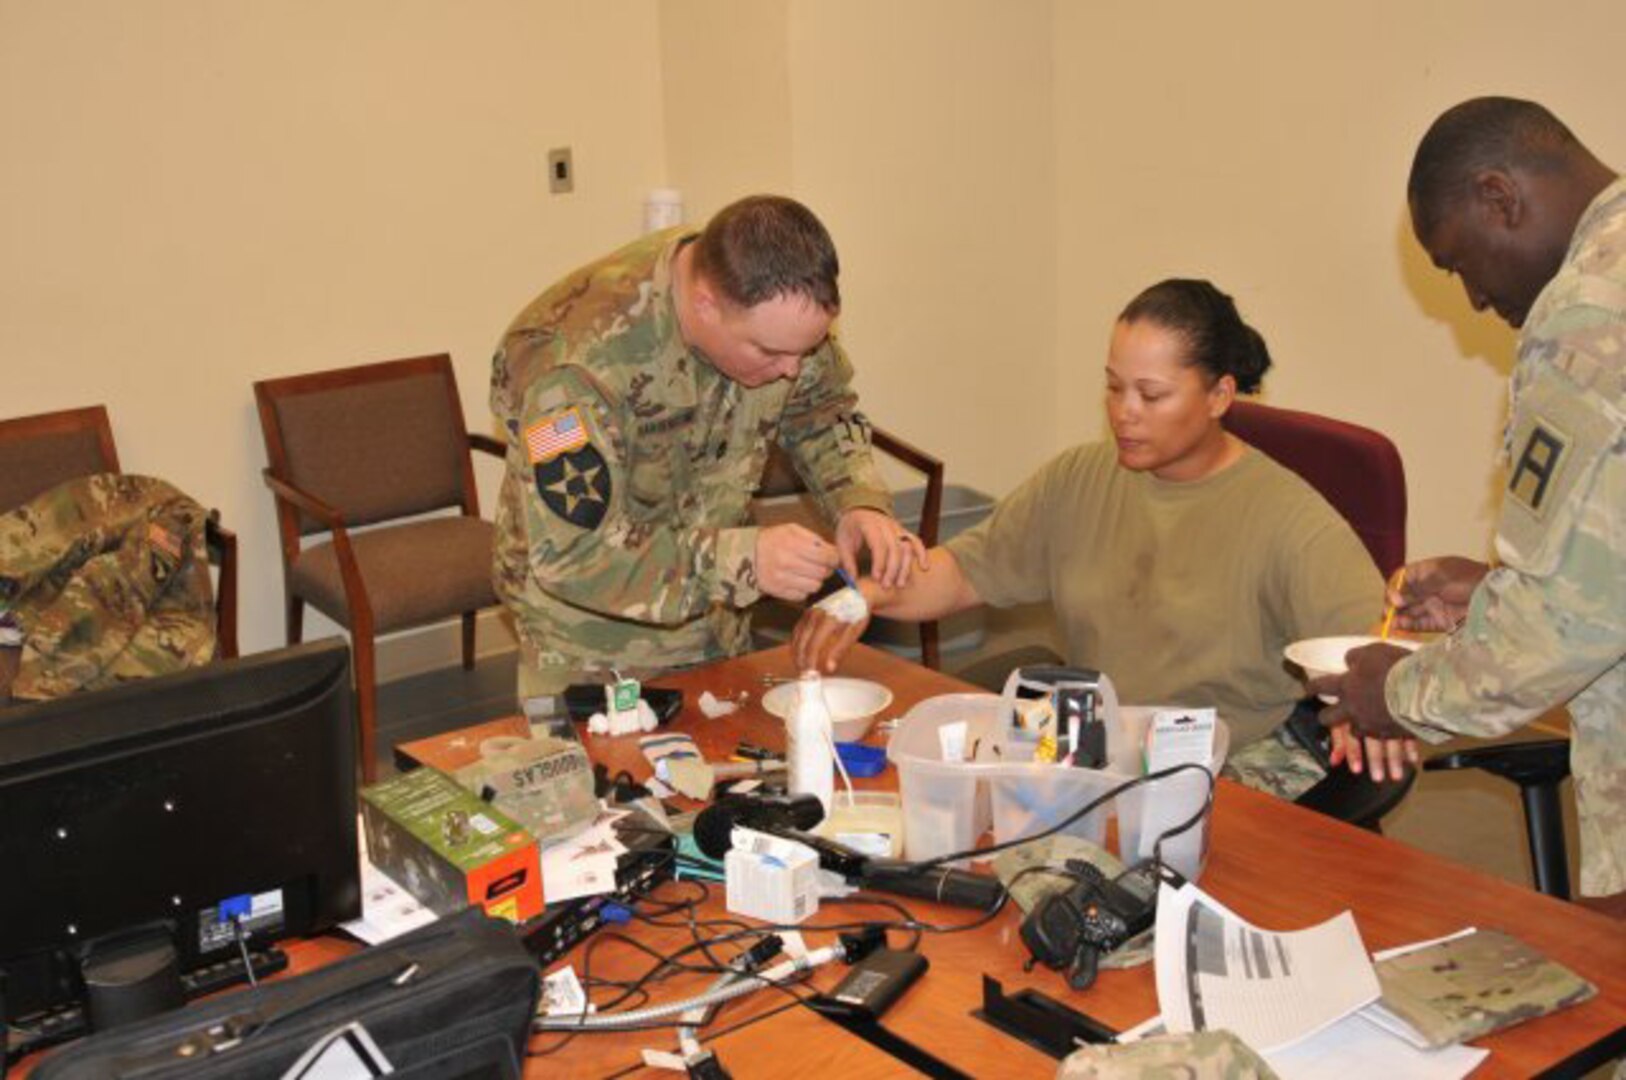 Sgt. 1st Class Jessica Douglas works with other First Army Soldiers during a moulage class while supporting the 155th Armored Brigade Combat Team's mobilization and validation exercise at Fort Bliss, Texas. Douglas, who is self-taught, used her knowledge to provide insight and training to other OC/Ts to enhance the realism of potential wounds suffered on the battlefield.